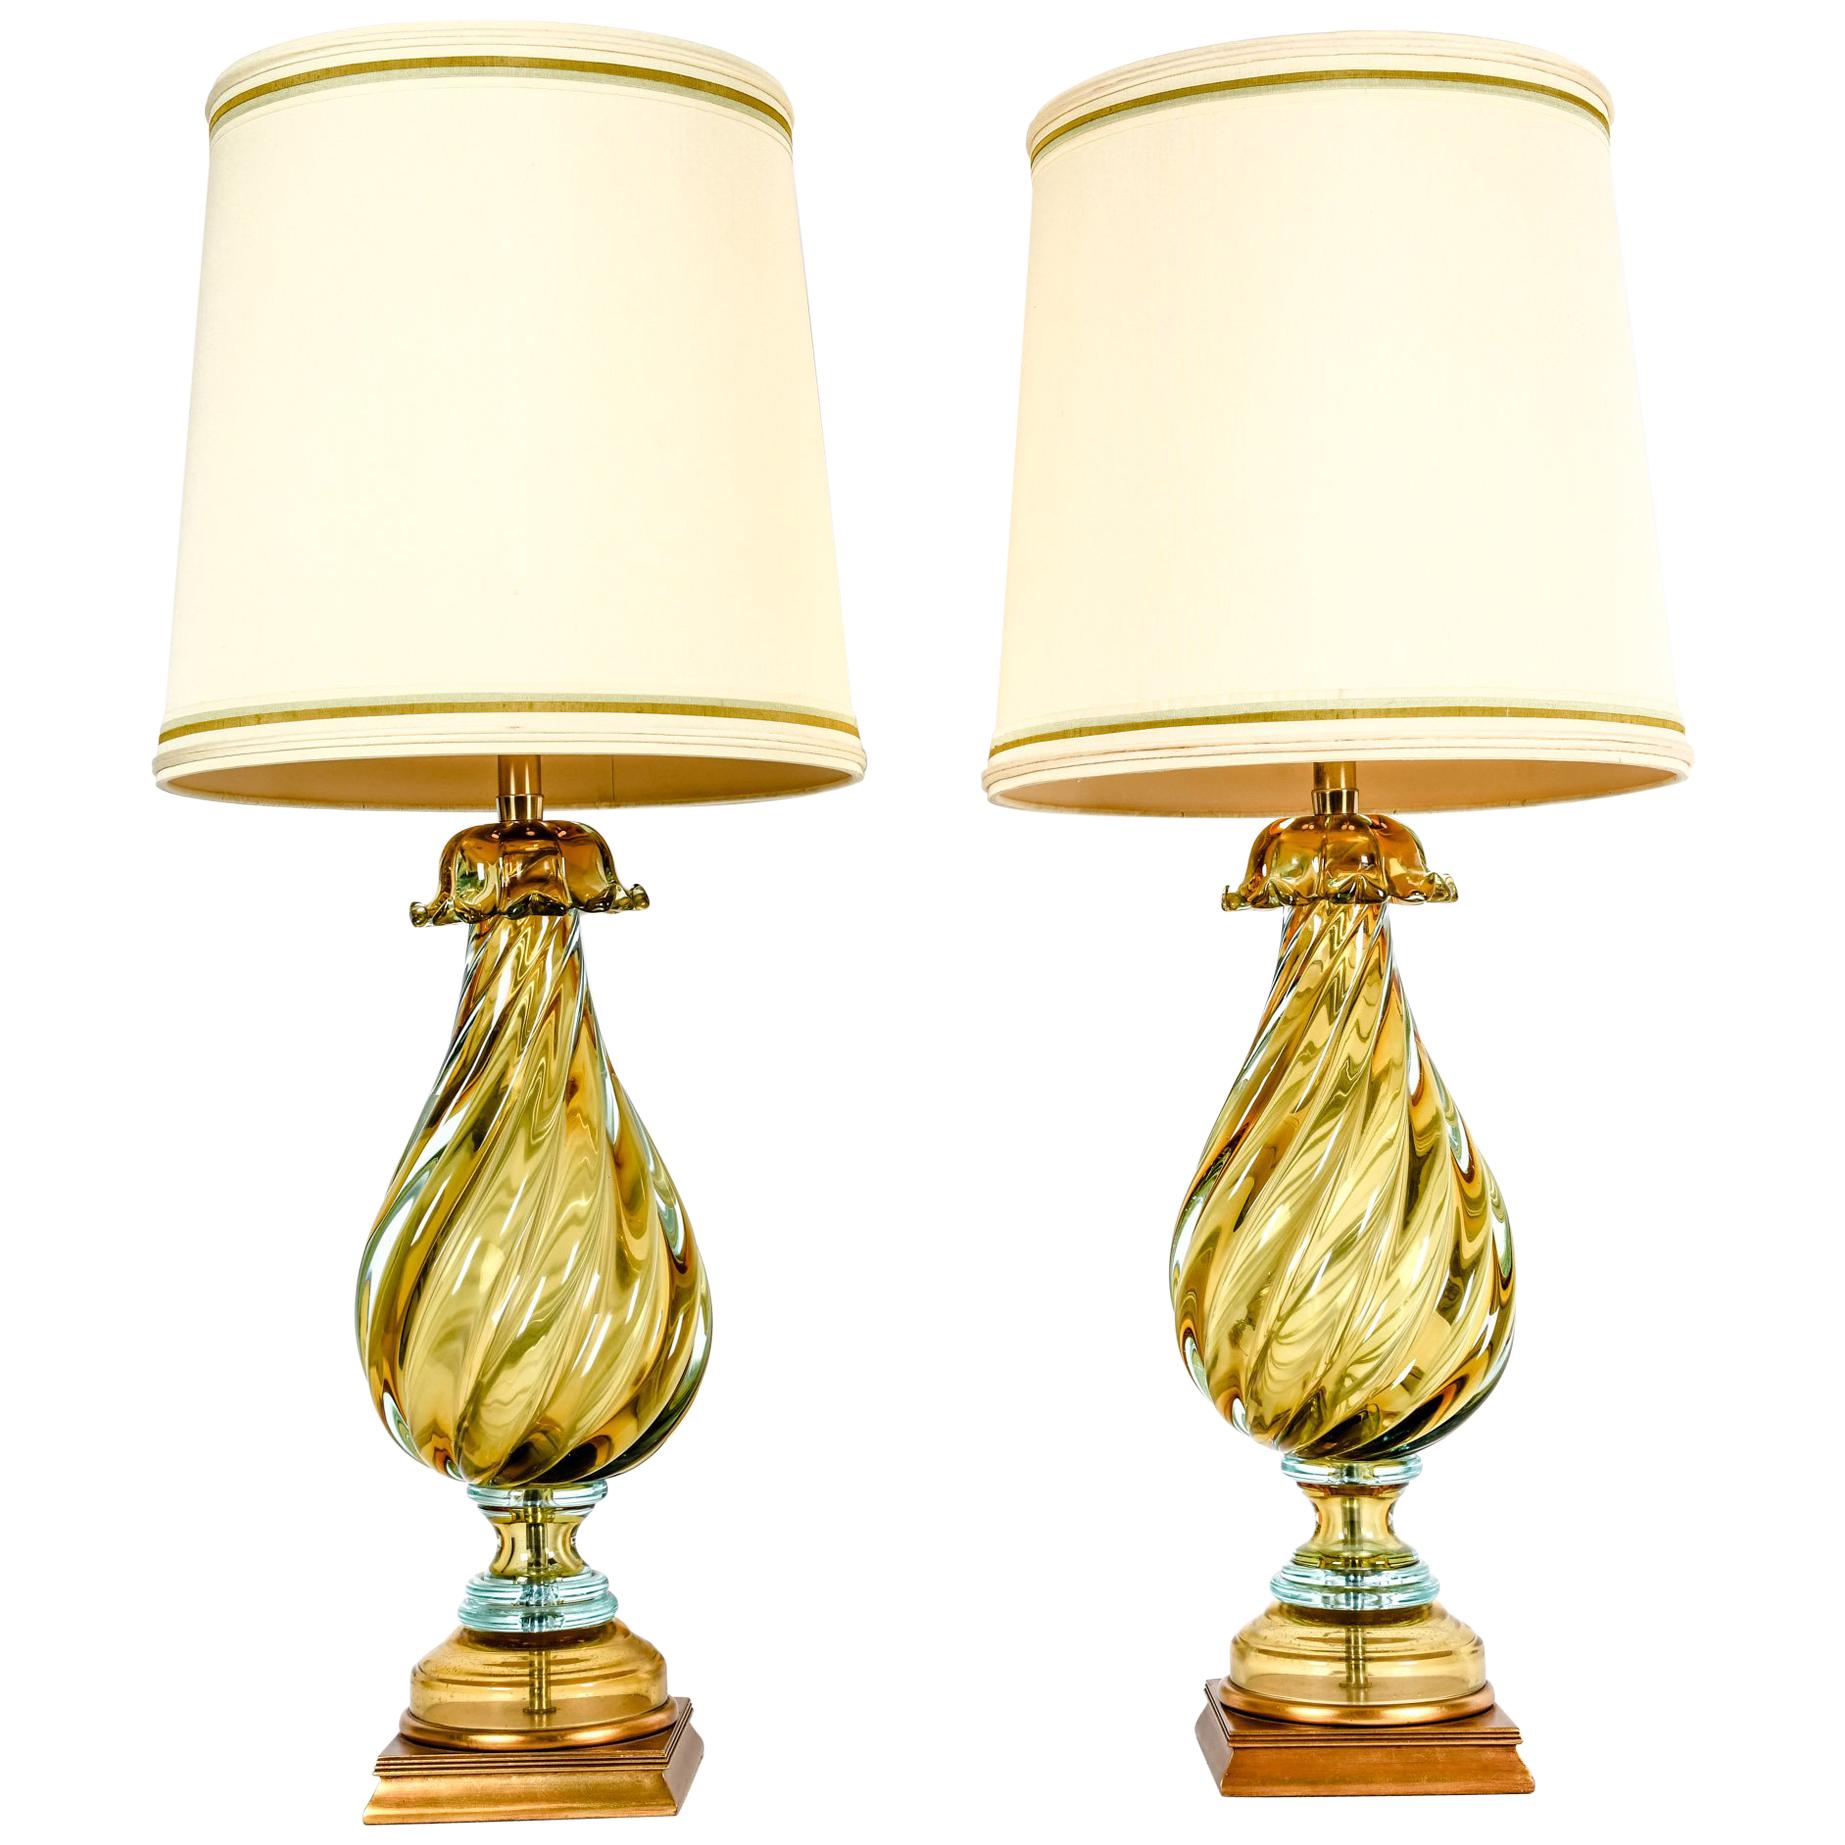 Early 20th Century Art Glass Pair Table Lamps With Wood Base